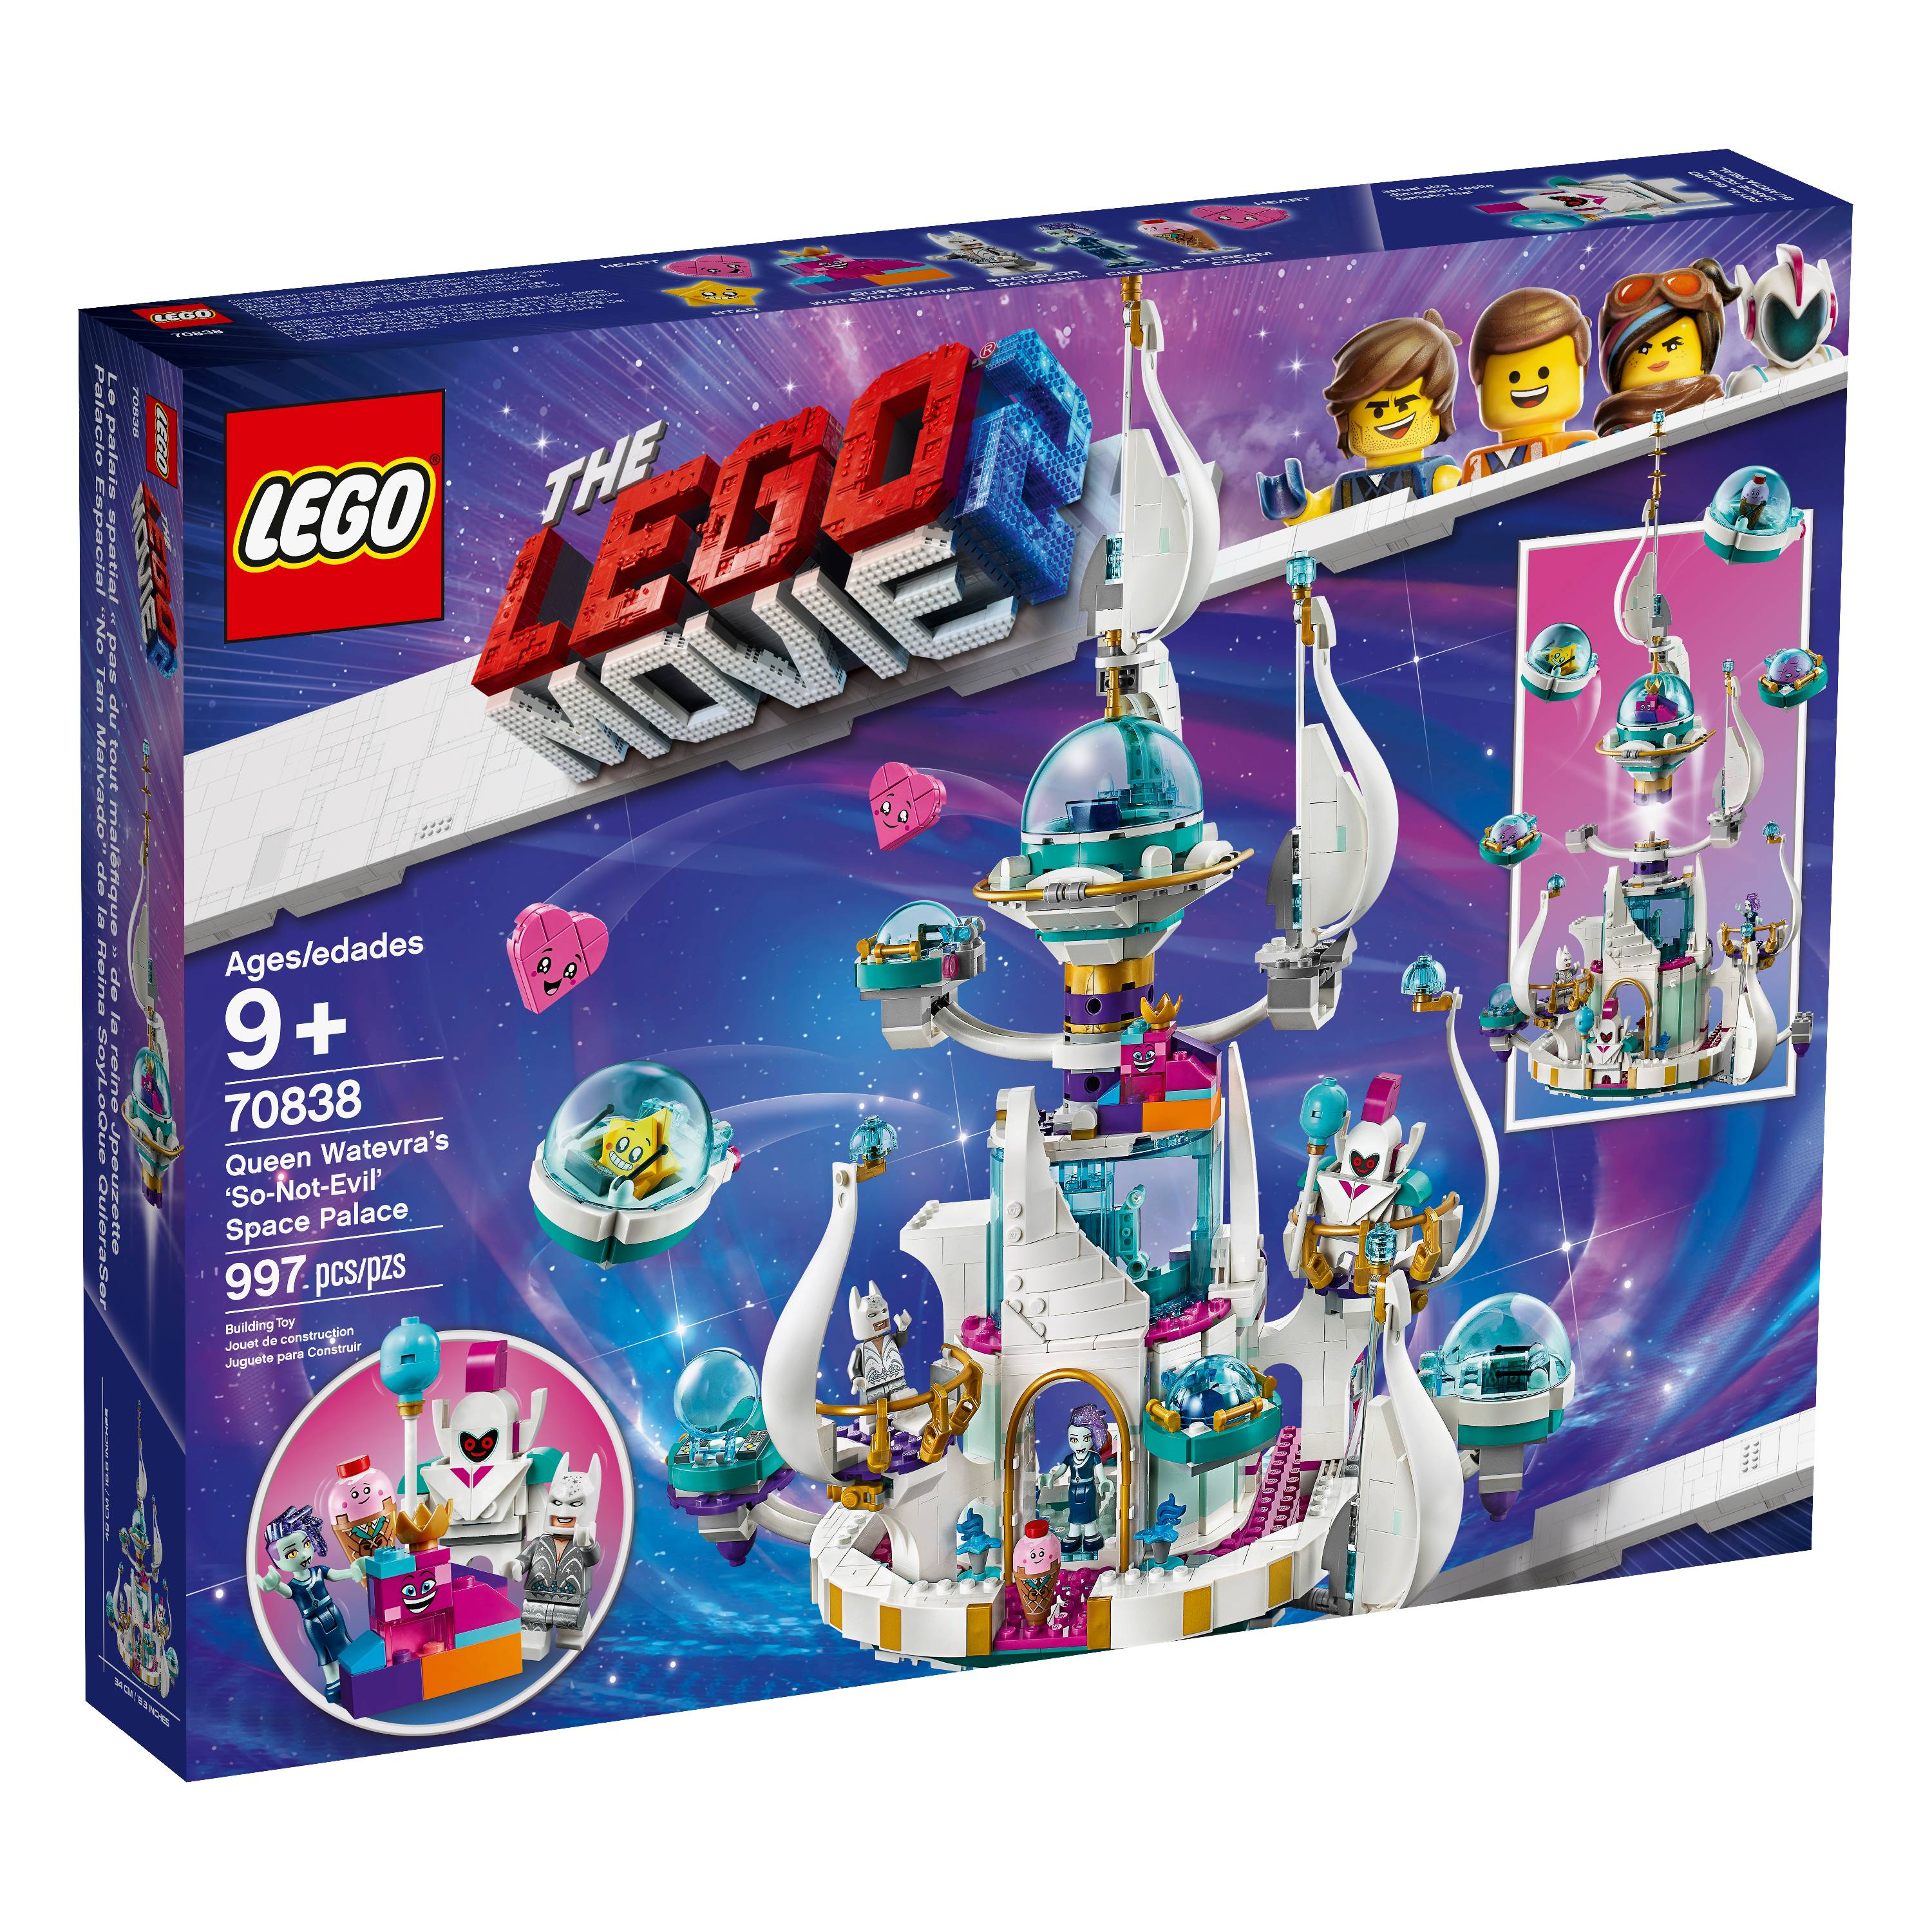 LEGO Movie Queen Watevra's So-Not-Evil' Space Pala 70838 - image 5 of 8